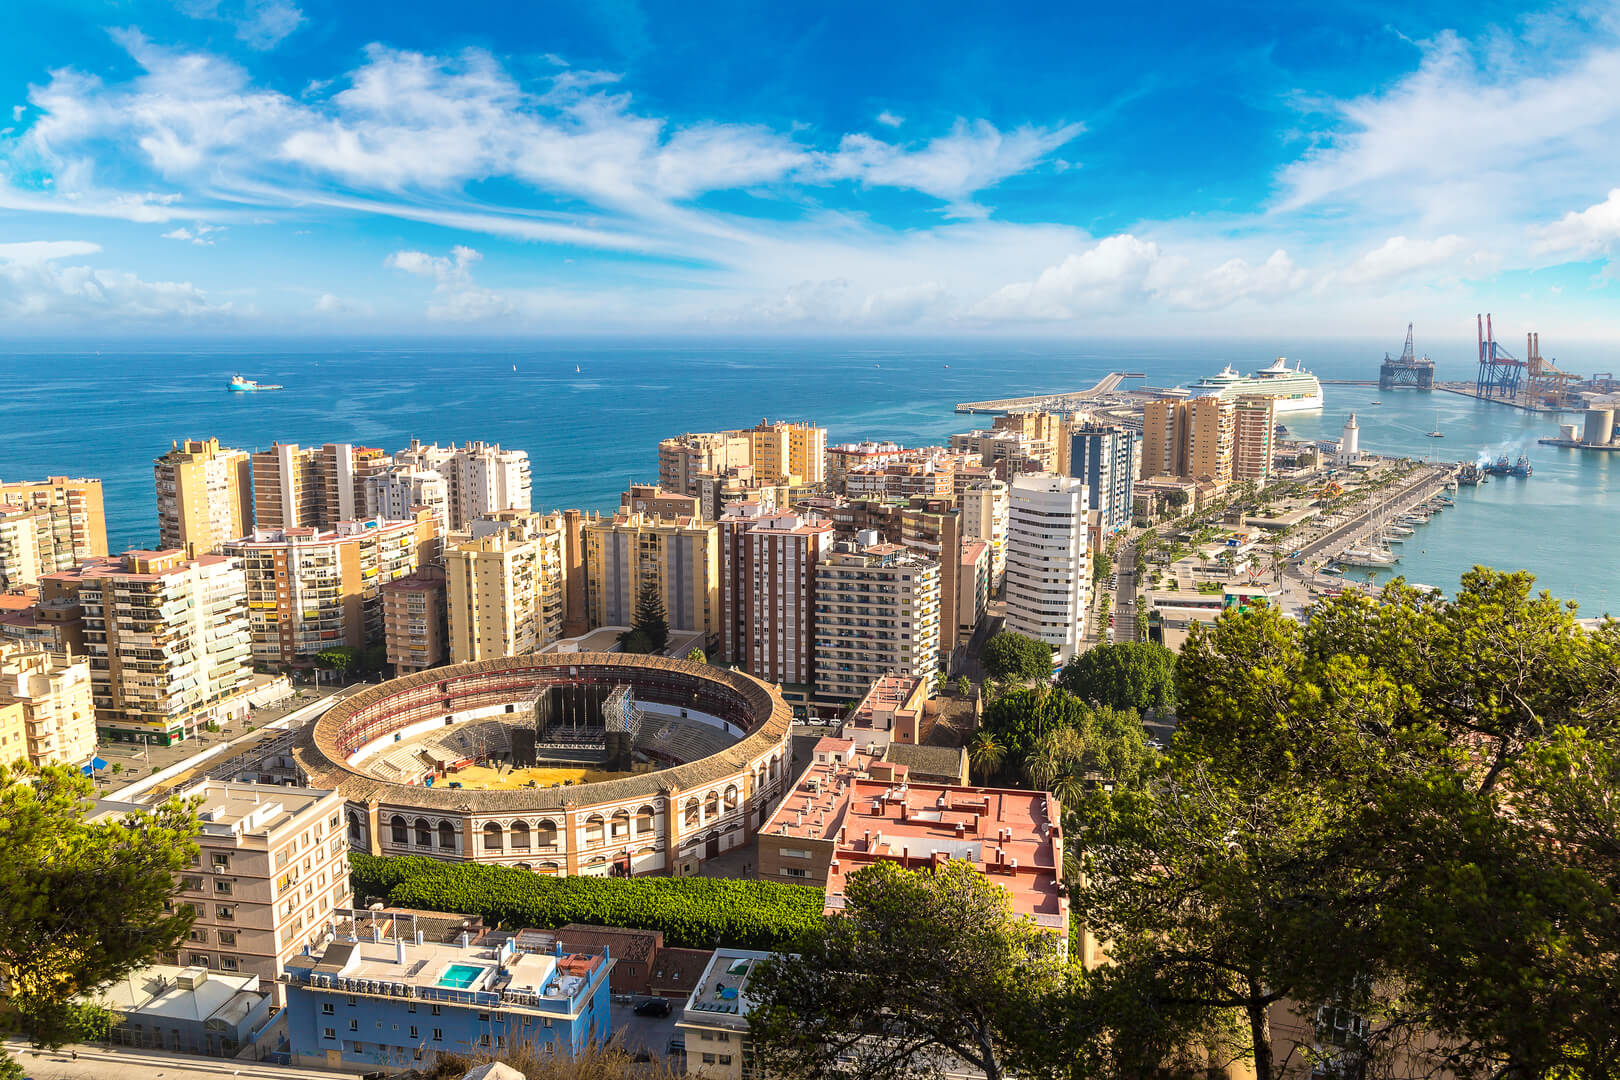 Panoramic aerial view of Malaga in a beautiful summer day, Spain
